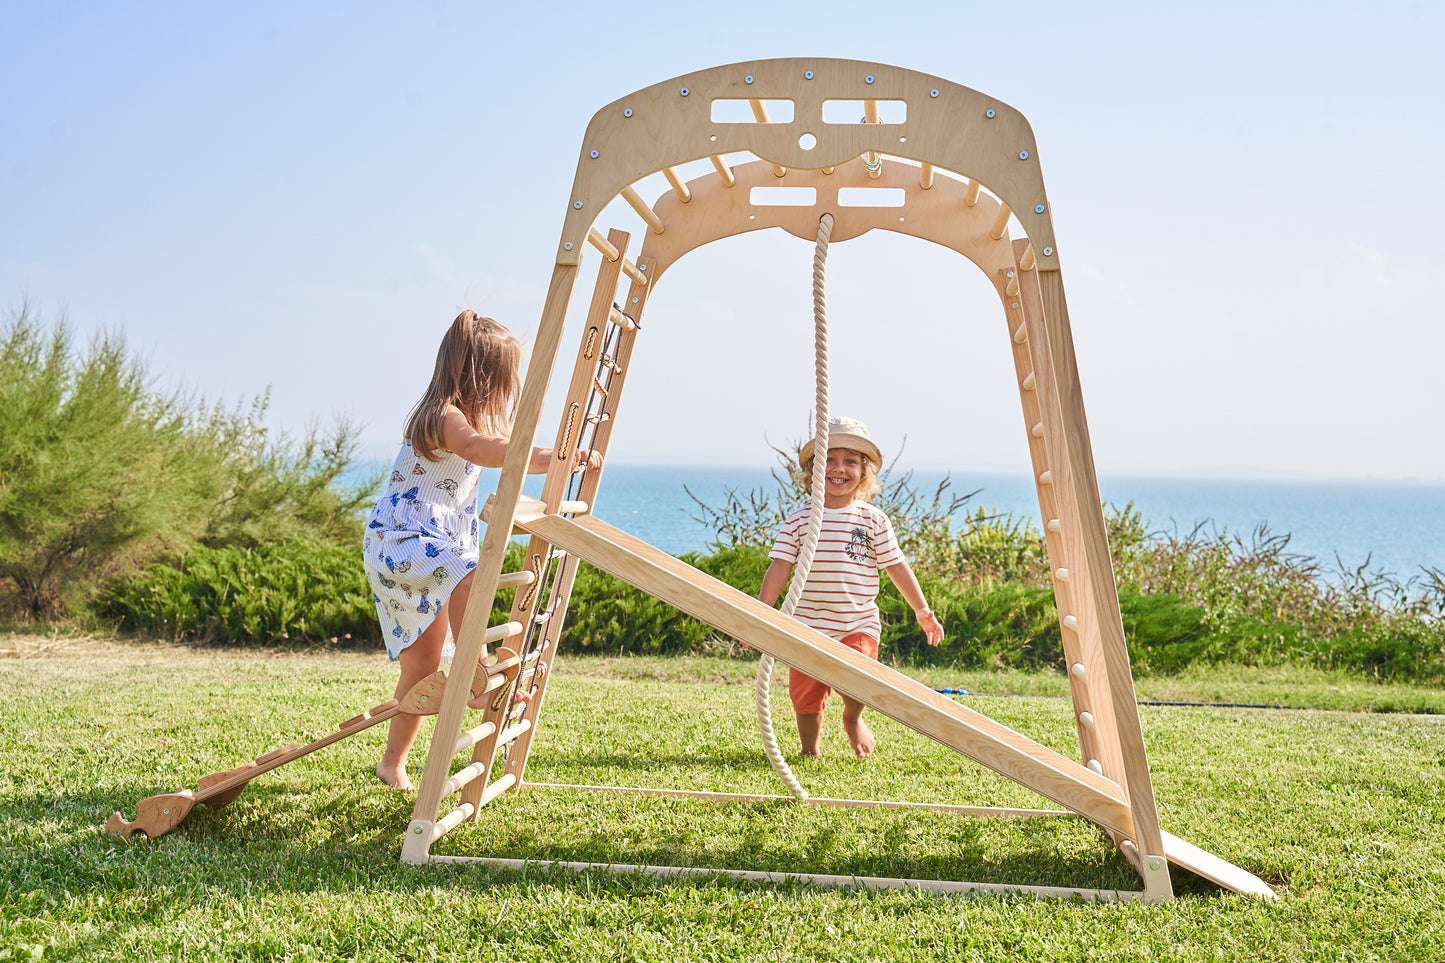 Wooden Children Climber Playset with Swing (Set 8 in 1)